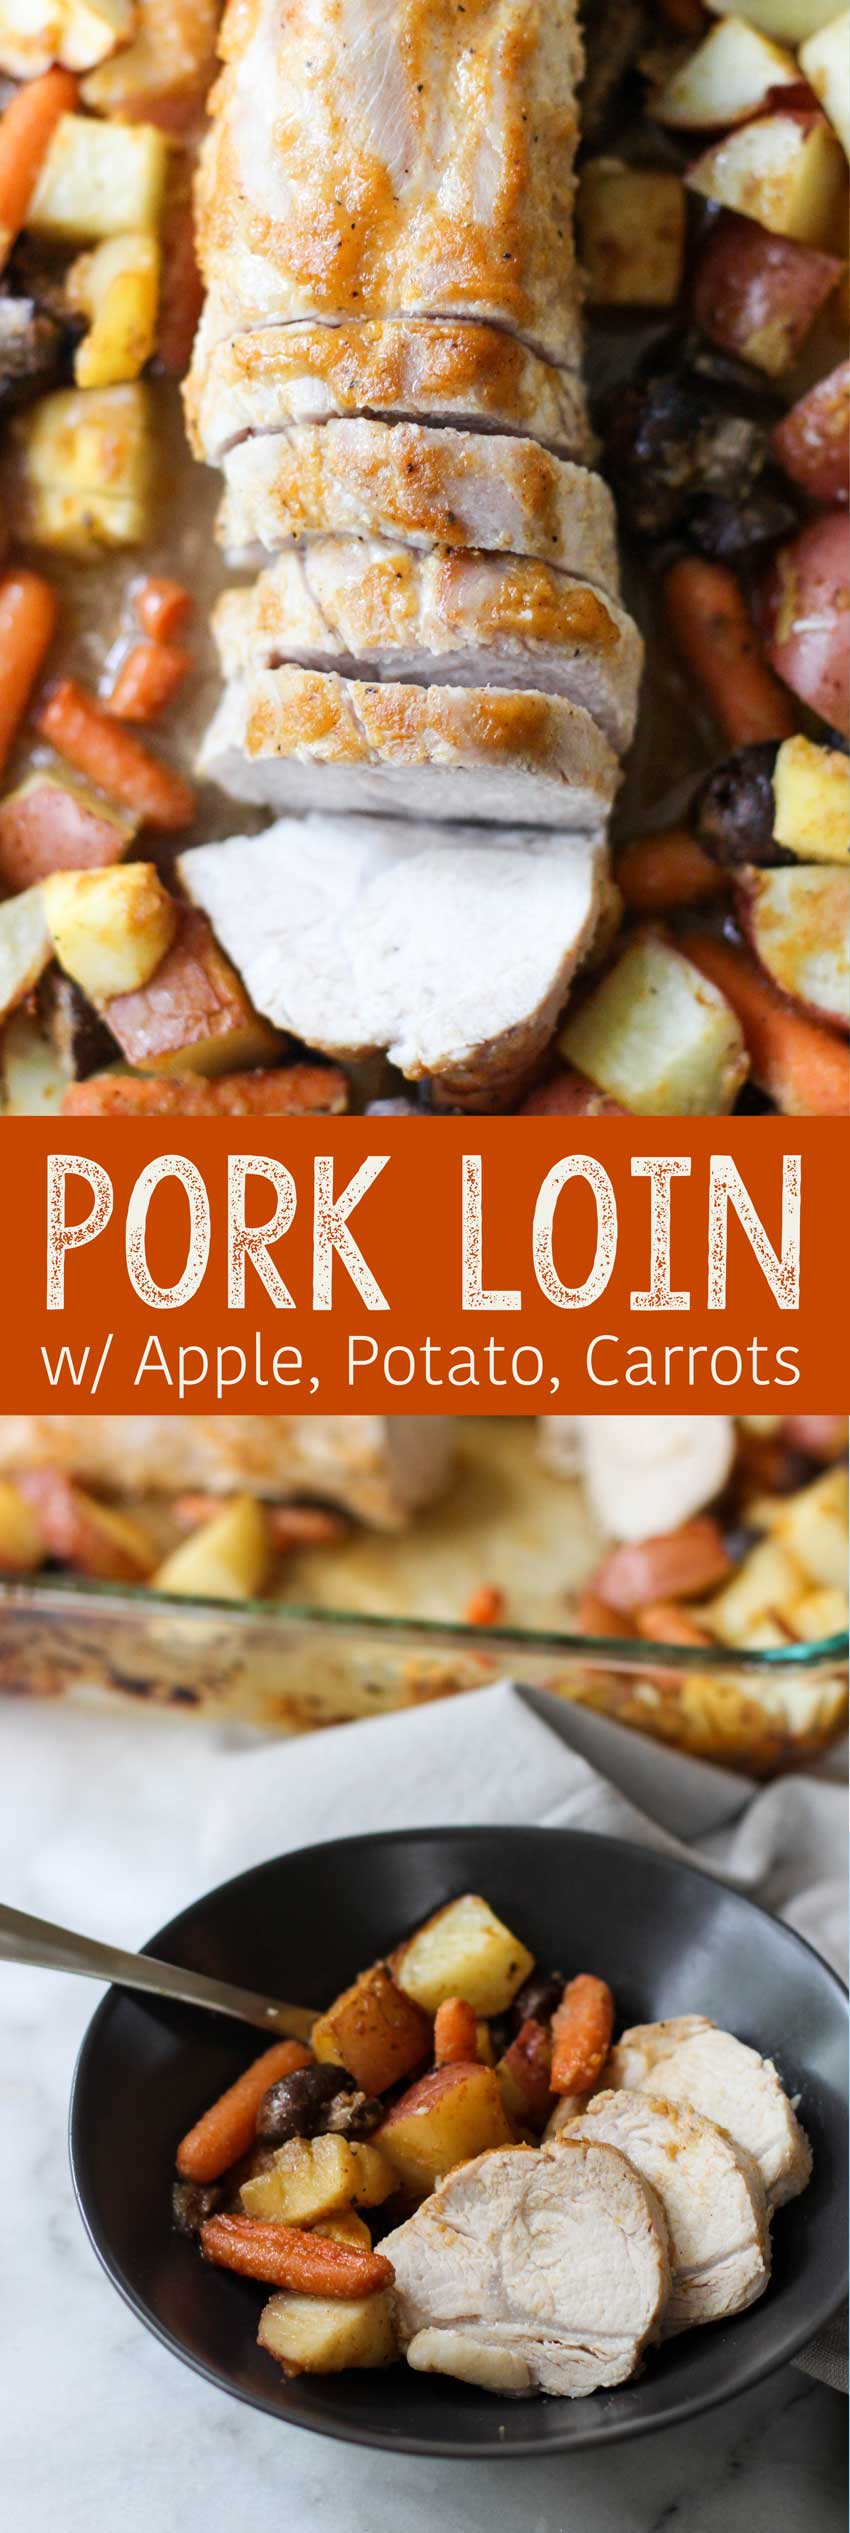 Pork loin with apples, carrots, and potatoes